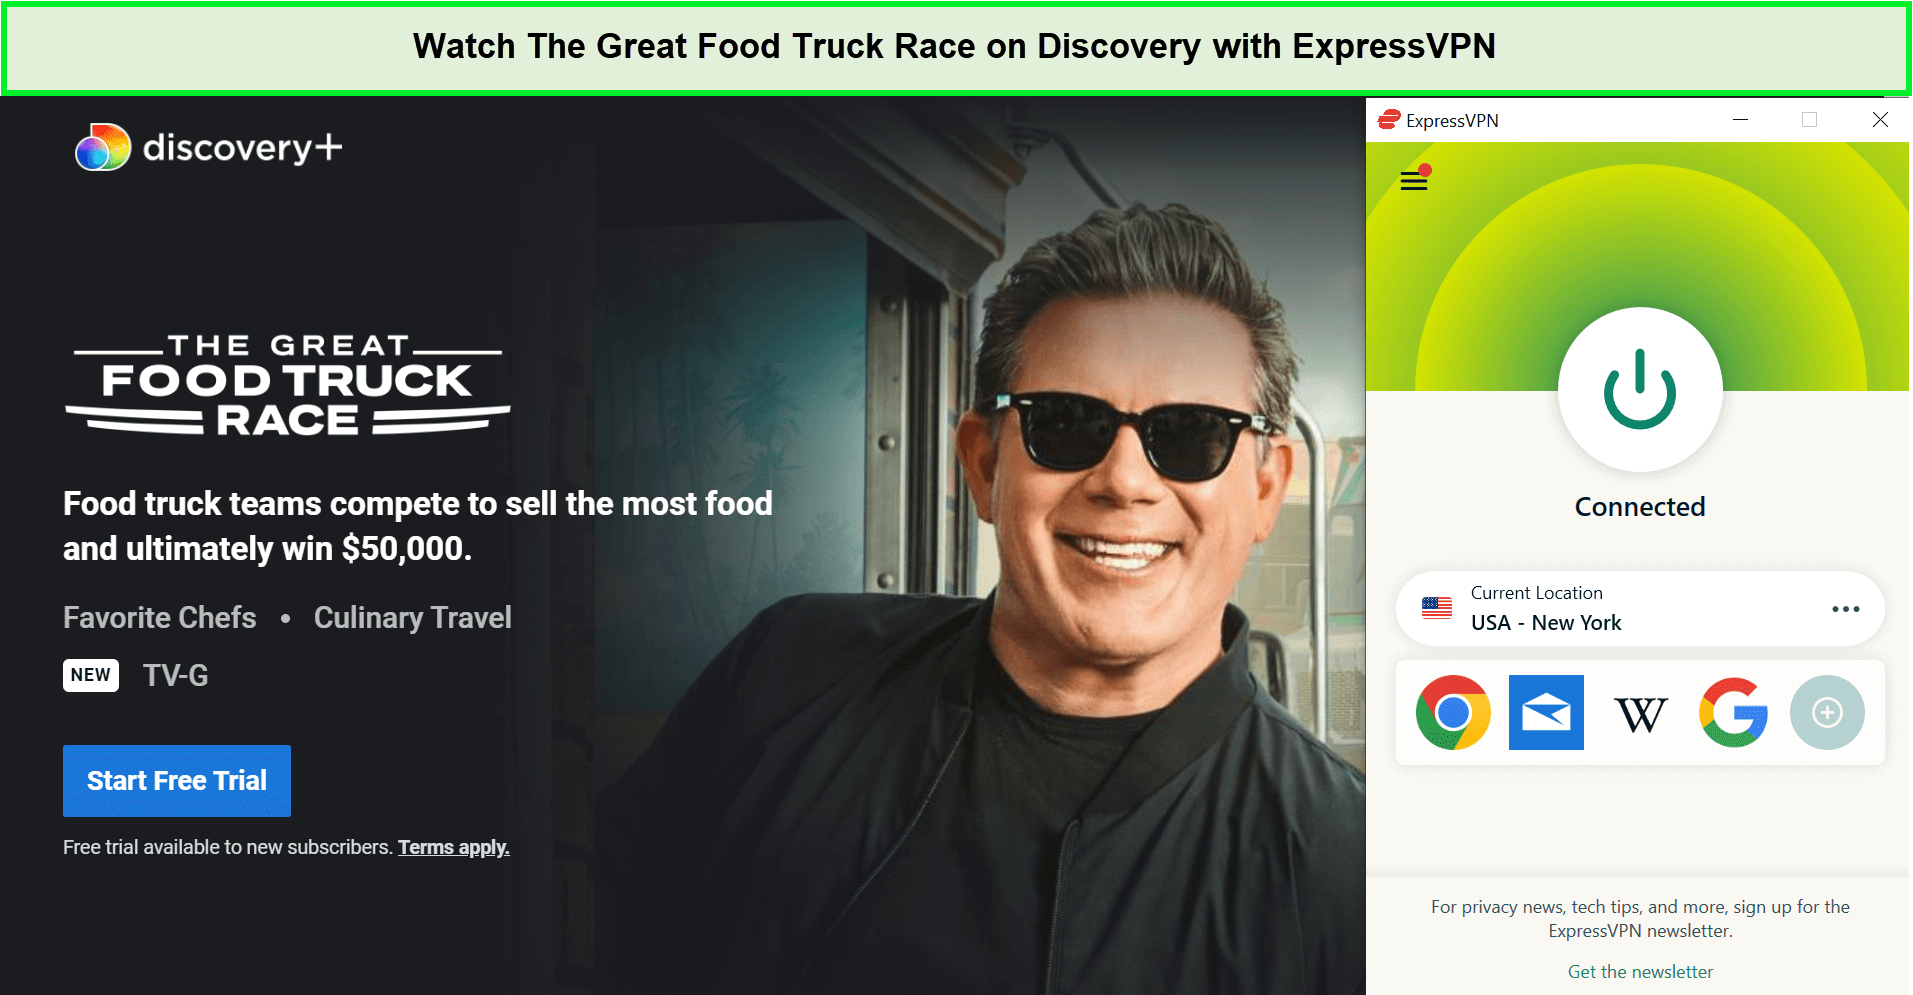 Watch-The-Great-Food-Truck-Race-in-jp-on-Discovery-with-ExpressVPN